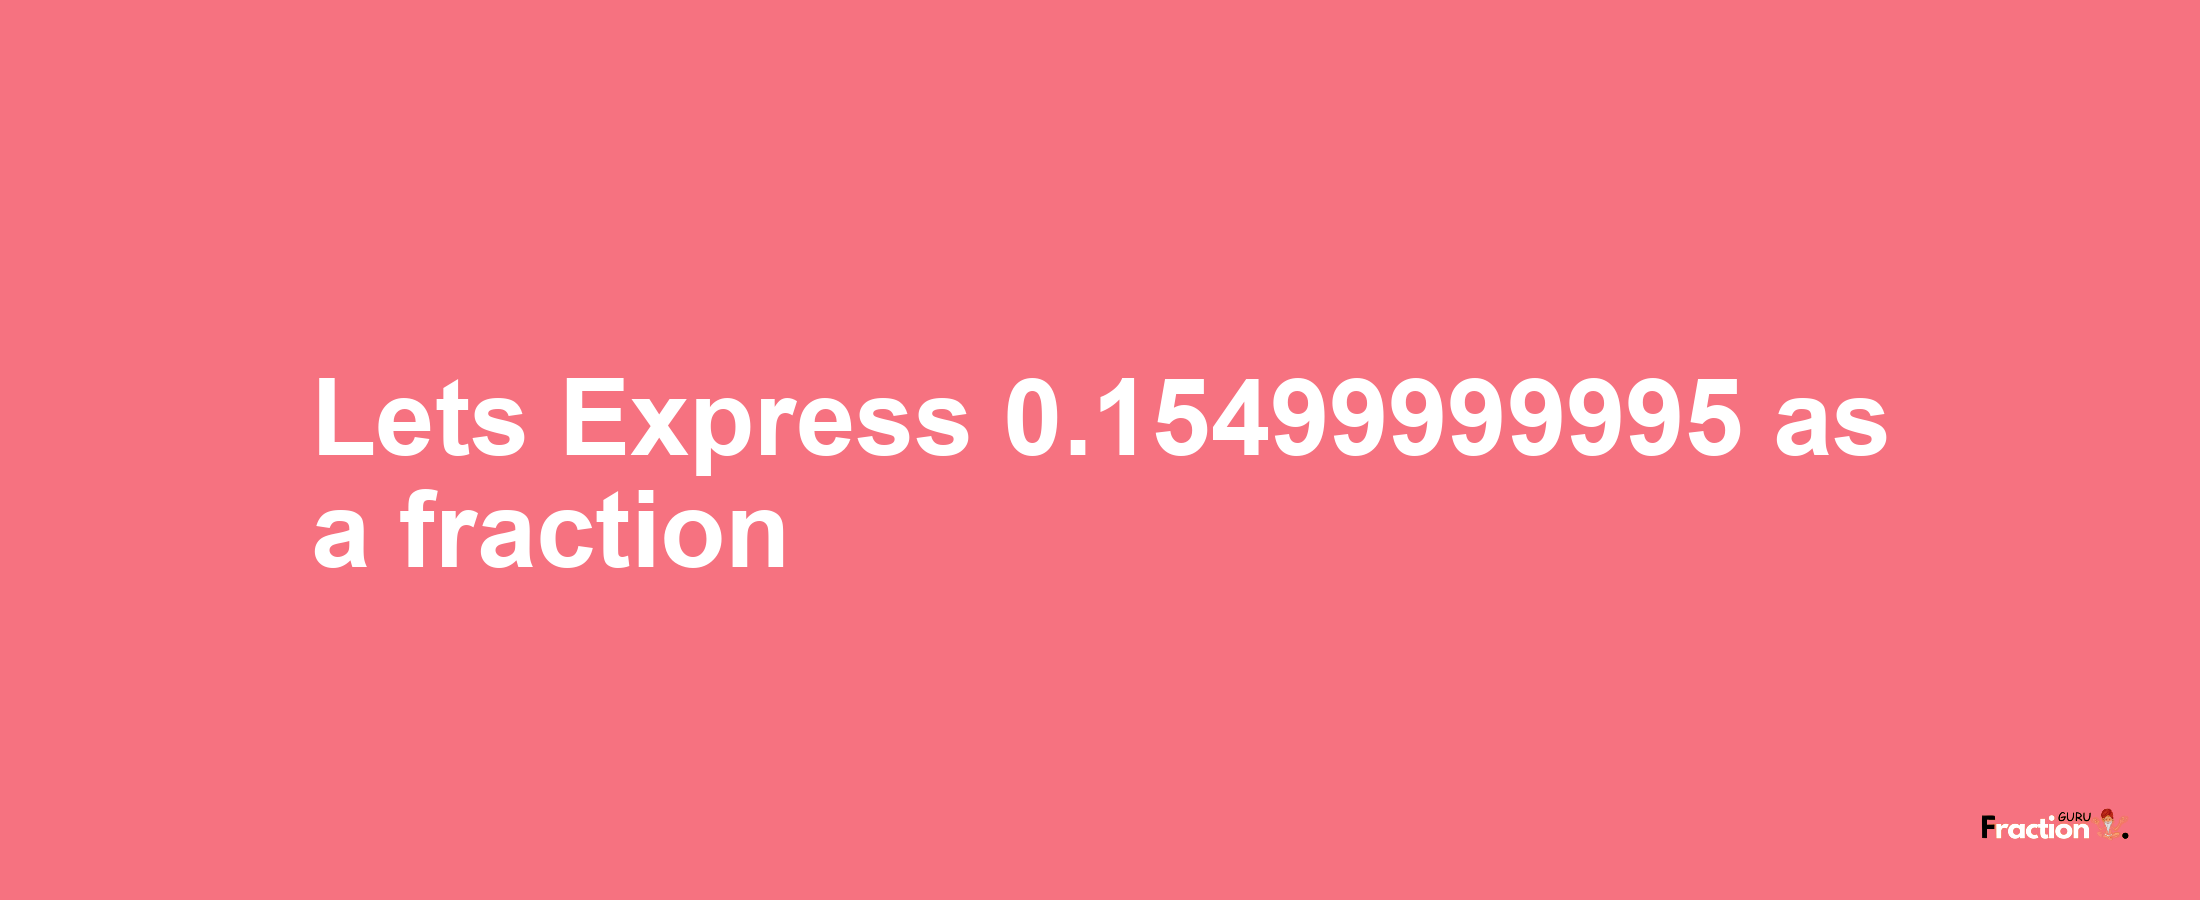 Lets Express 0.15499999995 as afraction